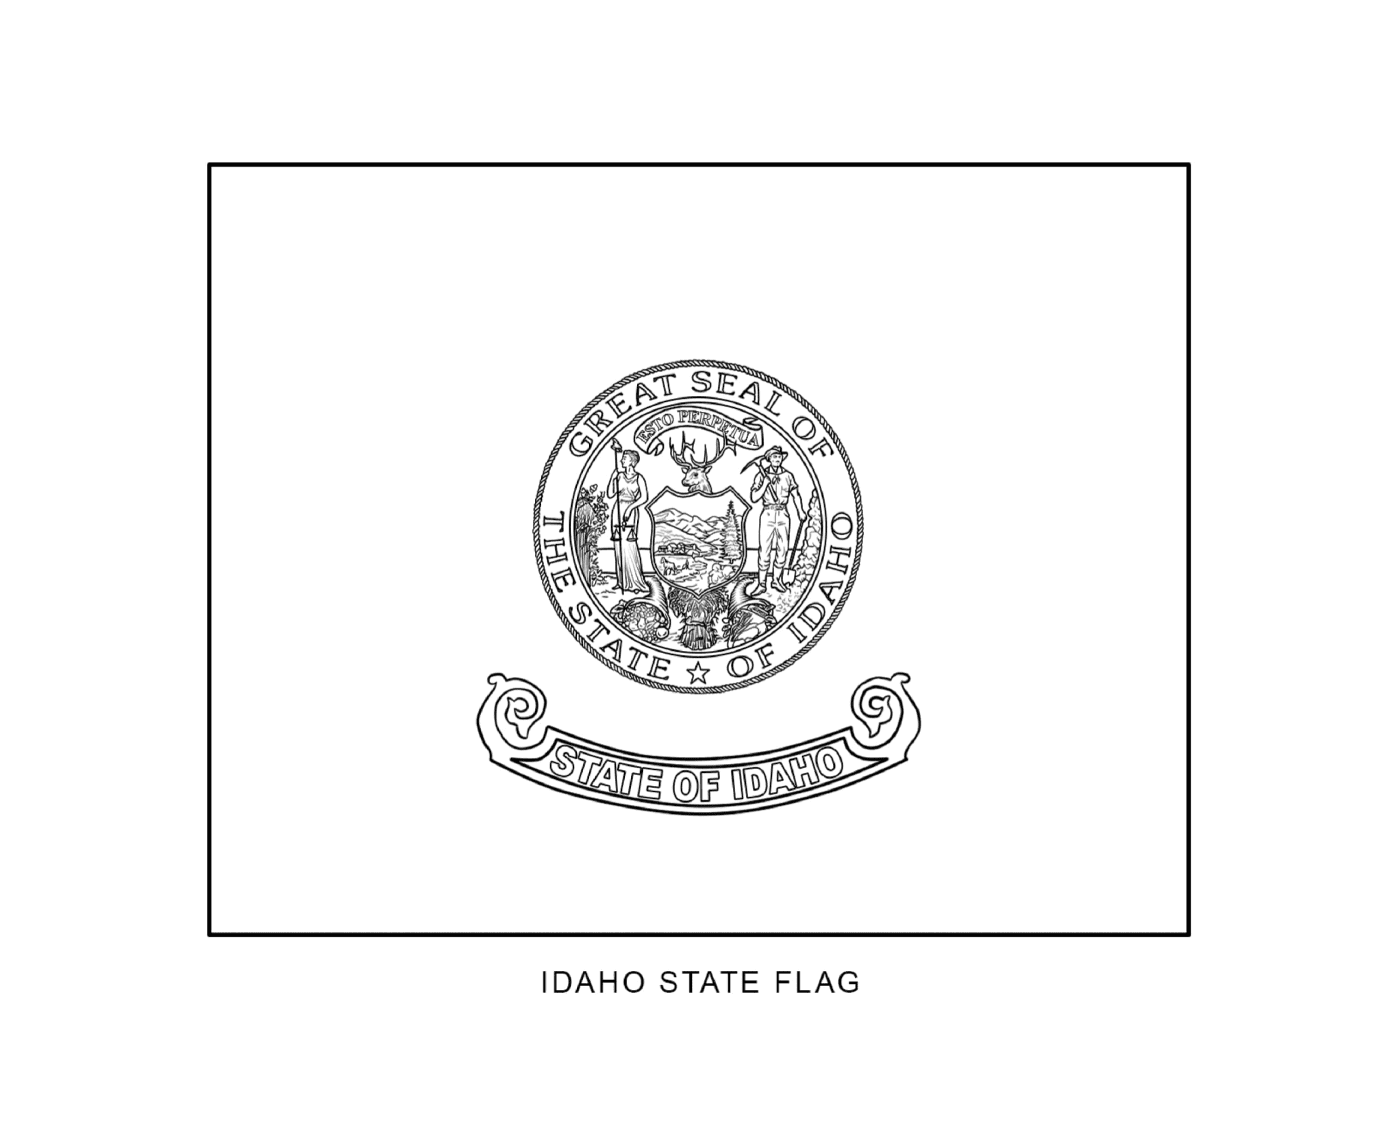  Flag of the State of Idaho represented 